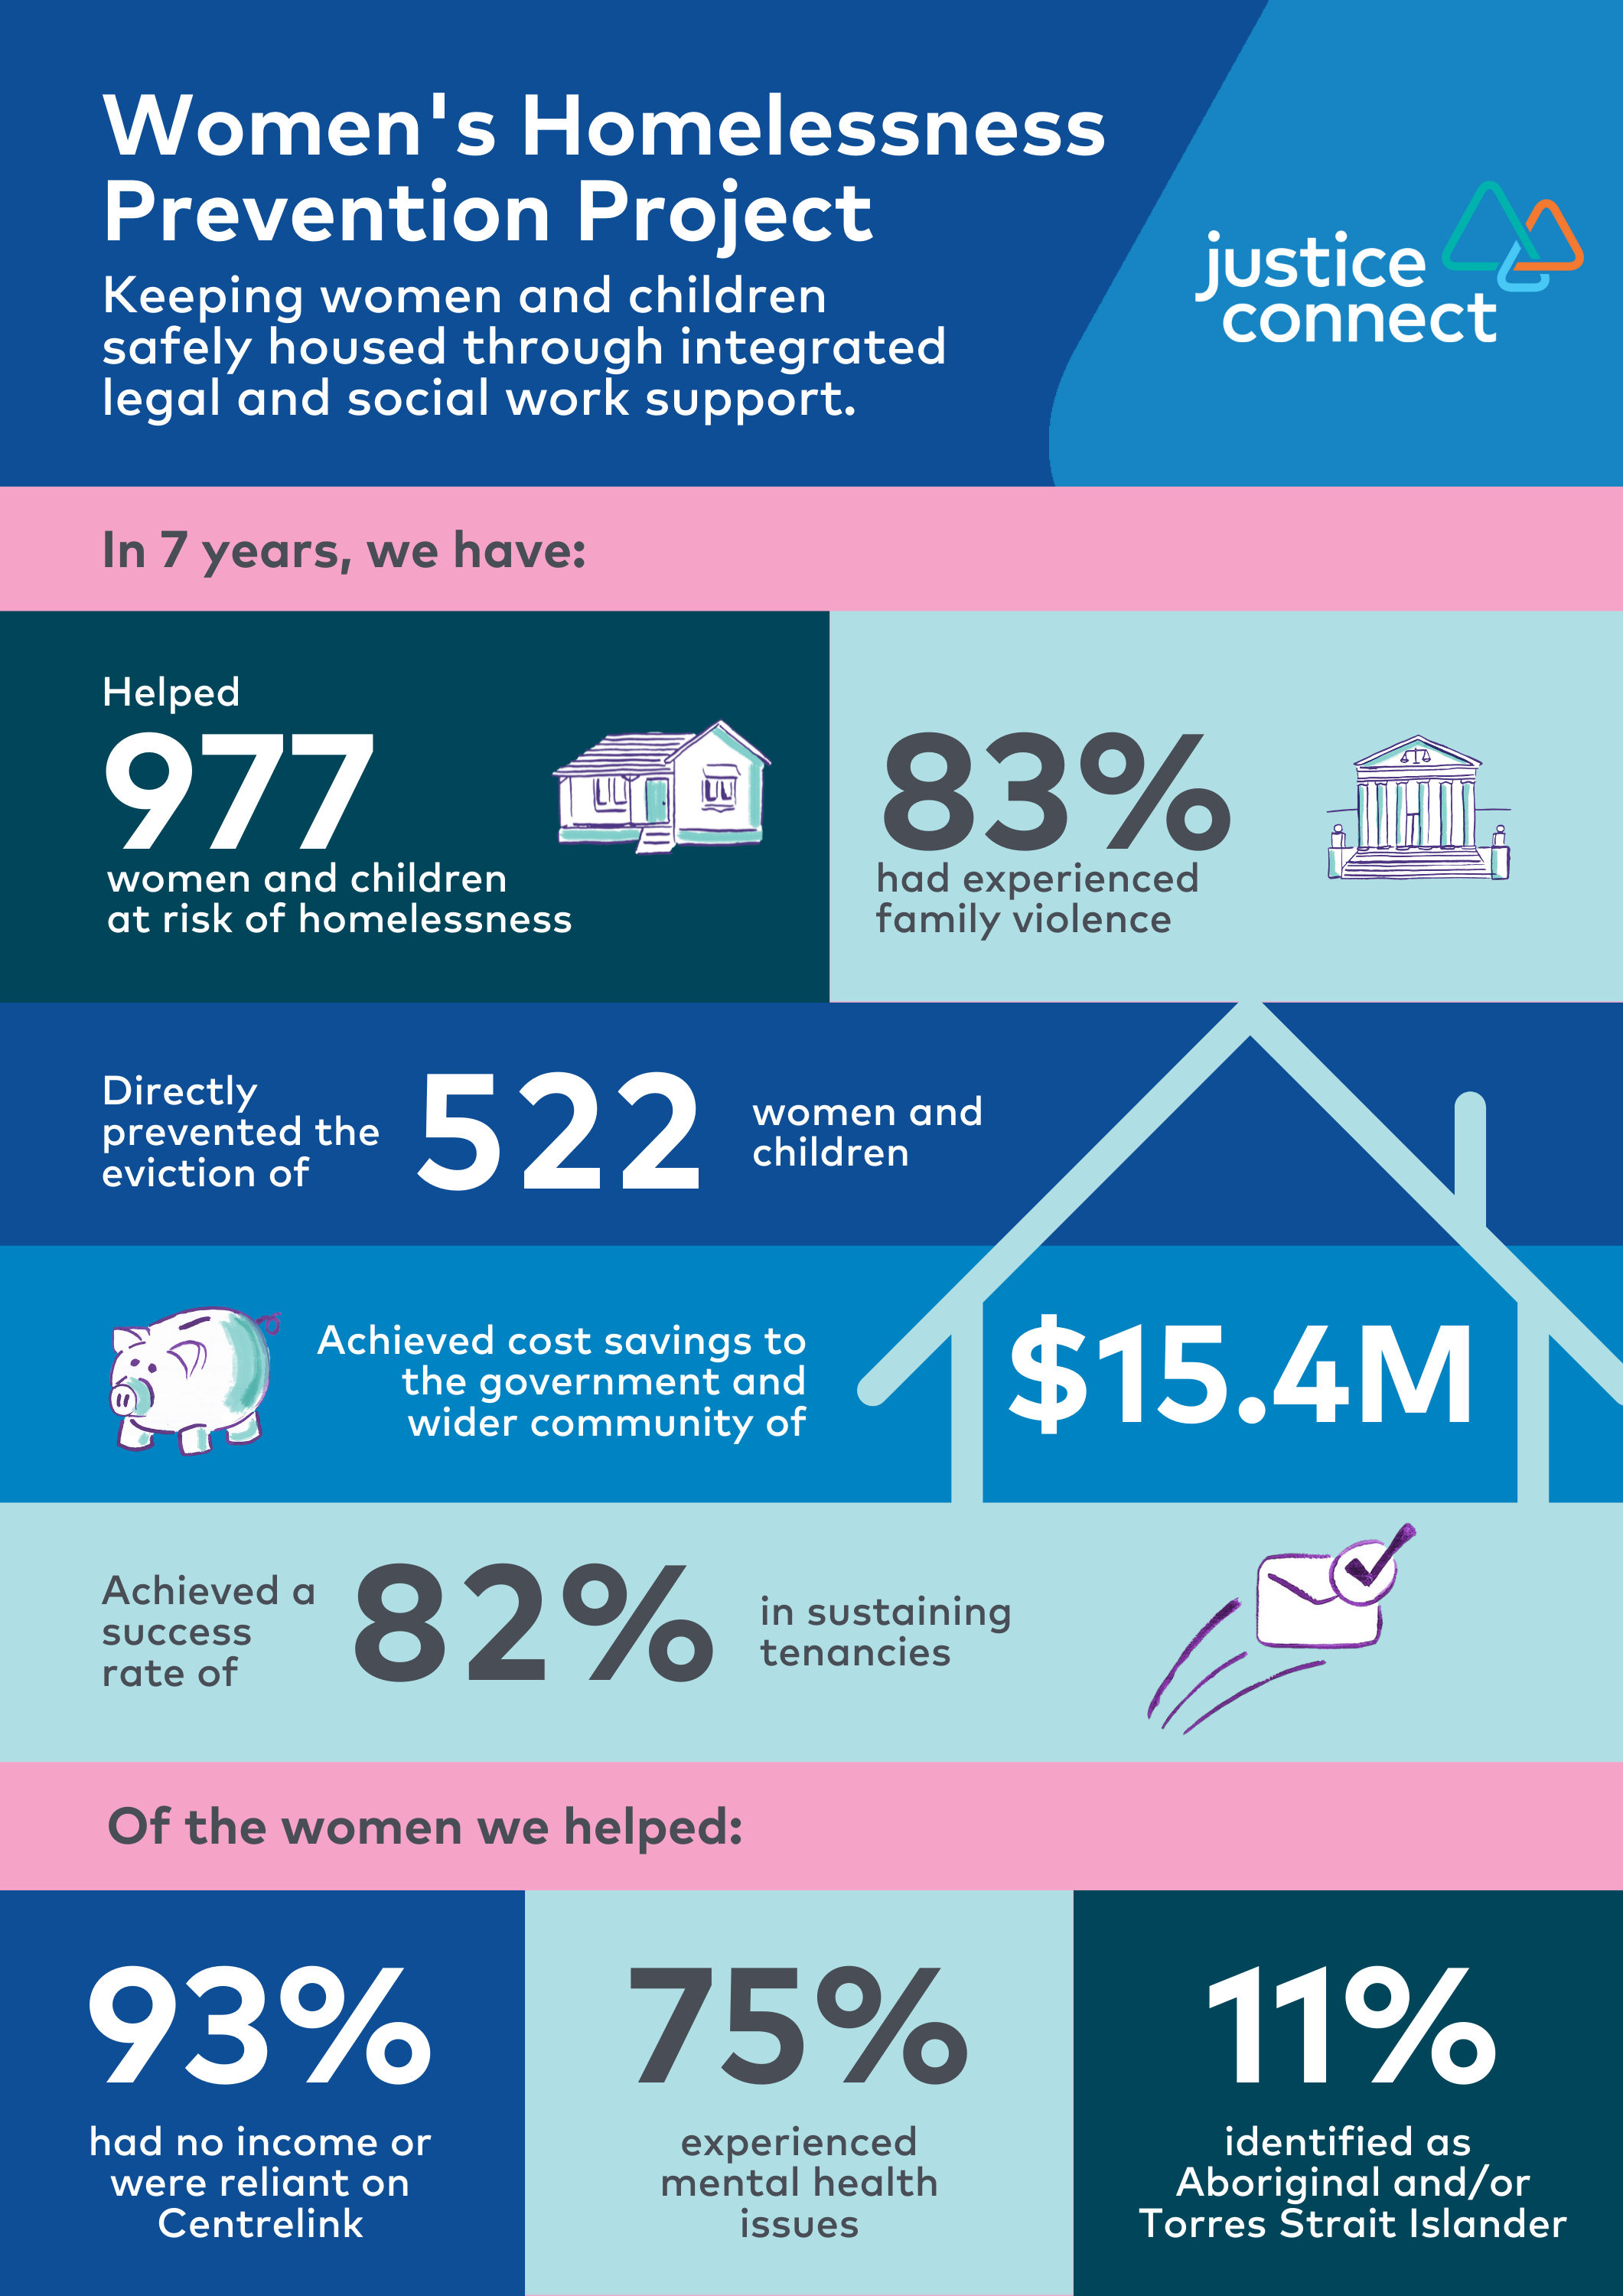 Infographic showing 7 years' worth of impact statistics for our Women's Homelessness Prevention Project